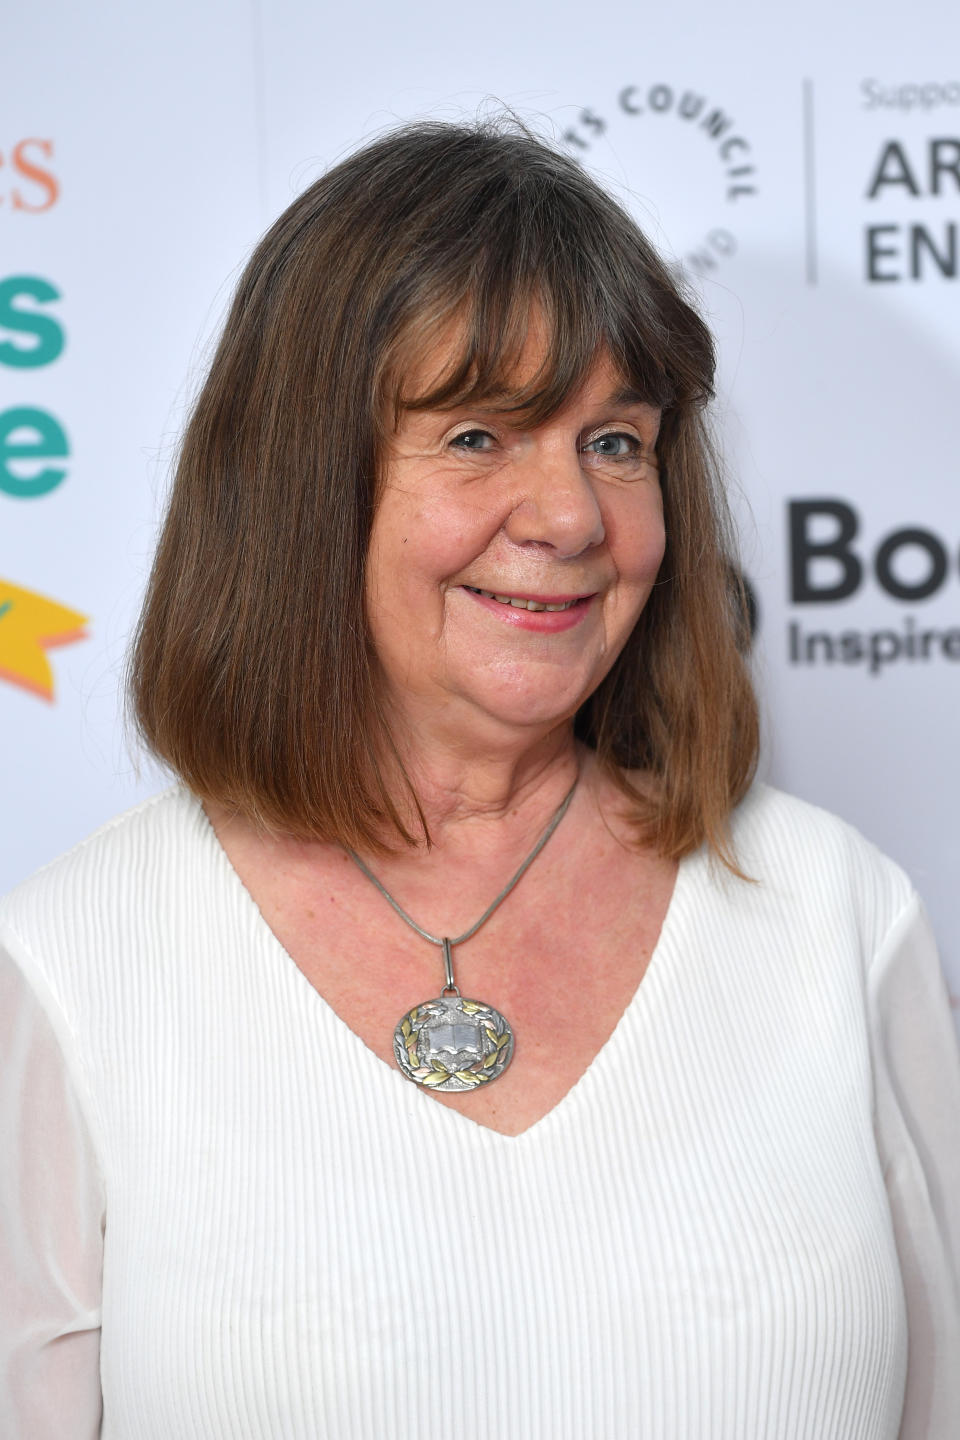 LONDON, ENGLAND - FEBRUARY 11: Children's author Julia Donaldson CBE attends an event to celebrate 20 years of the Waterstones Children's Laureate at Waterstones Piccadilly on February 11, 2019 in London, England. (Photo by Gareth Cattermole/Getty Images)